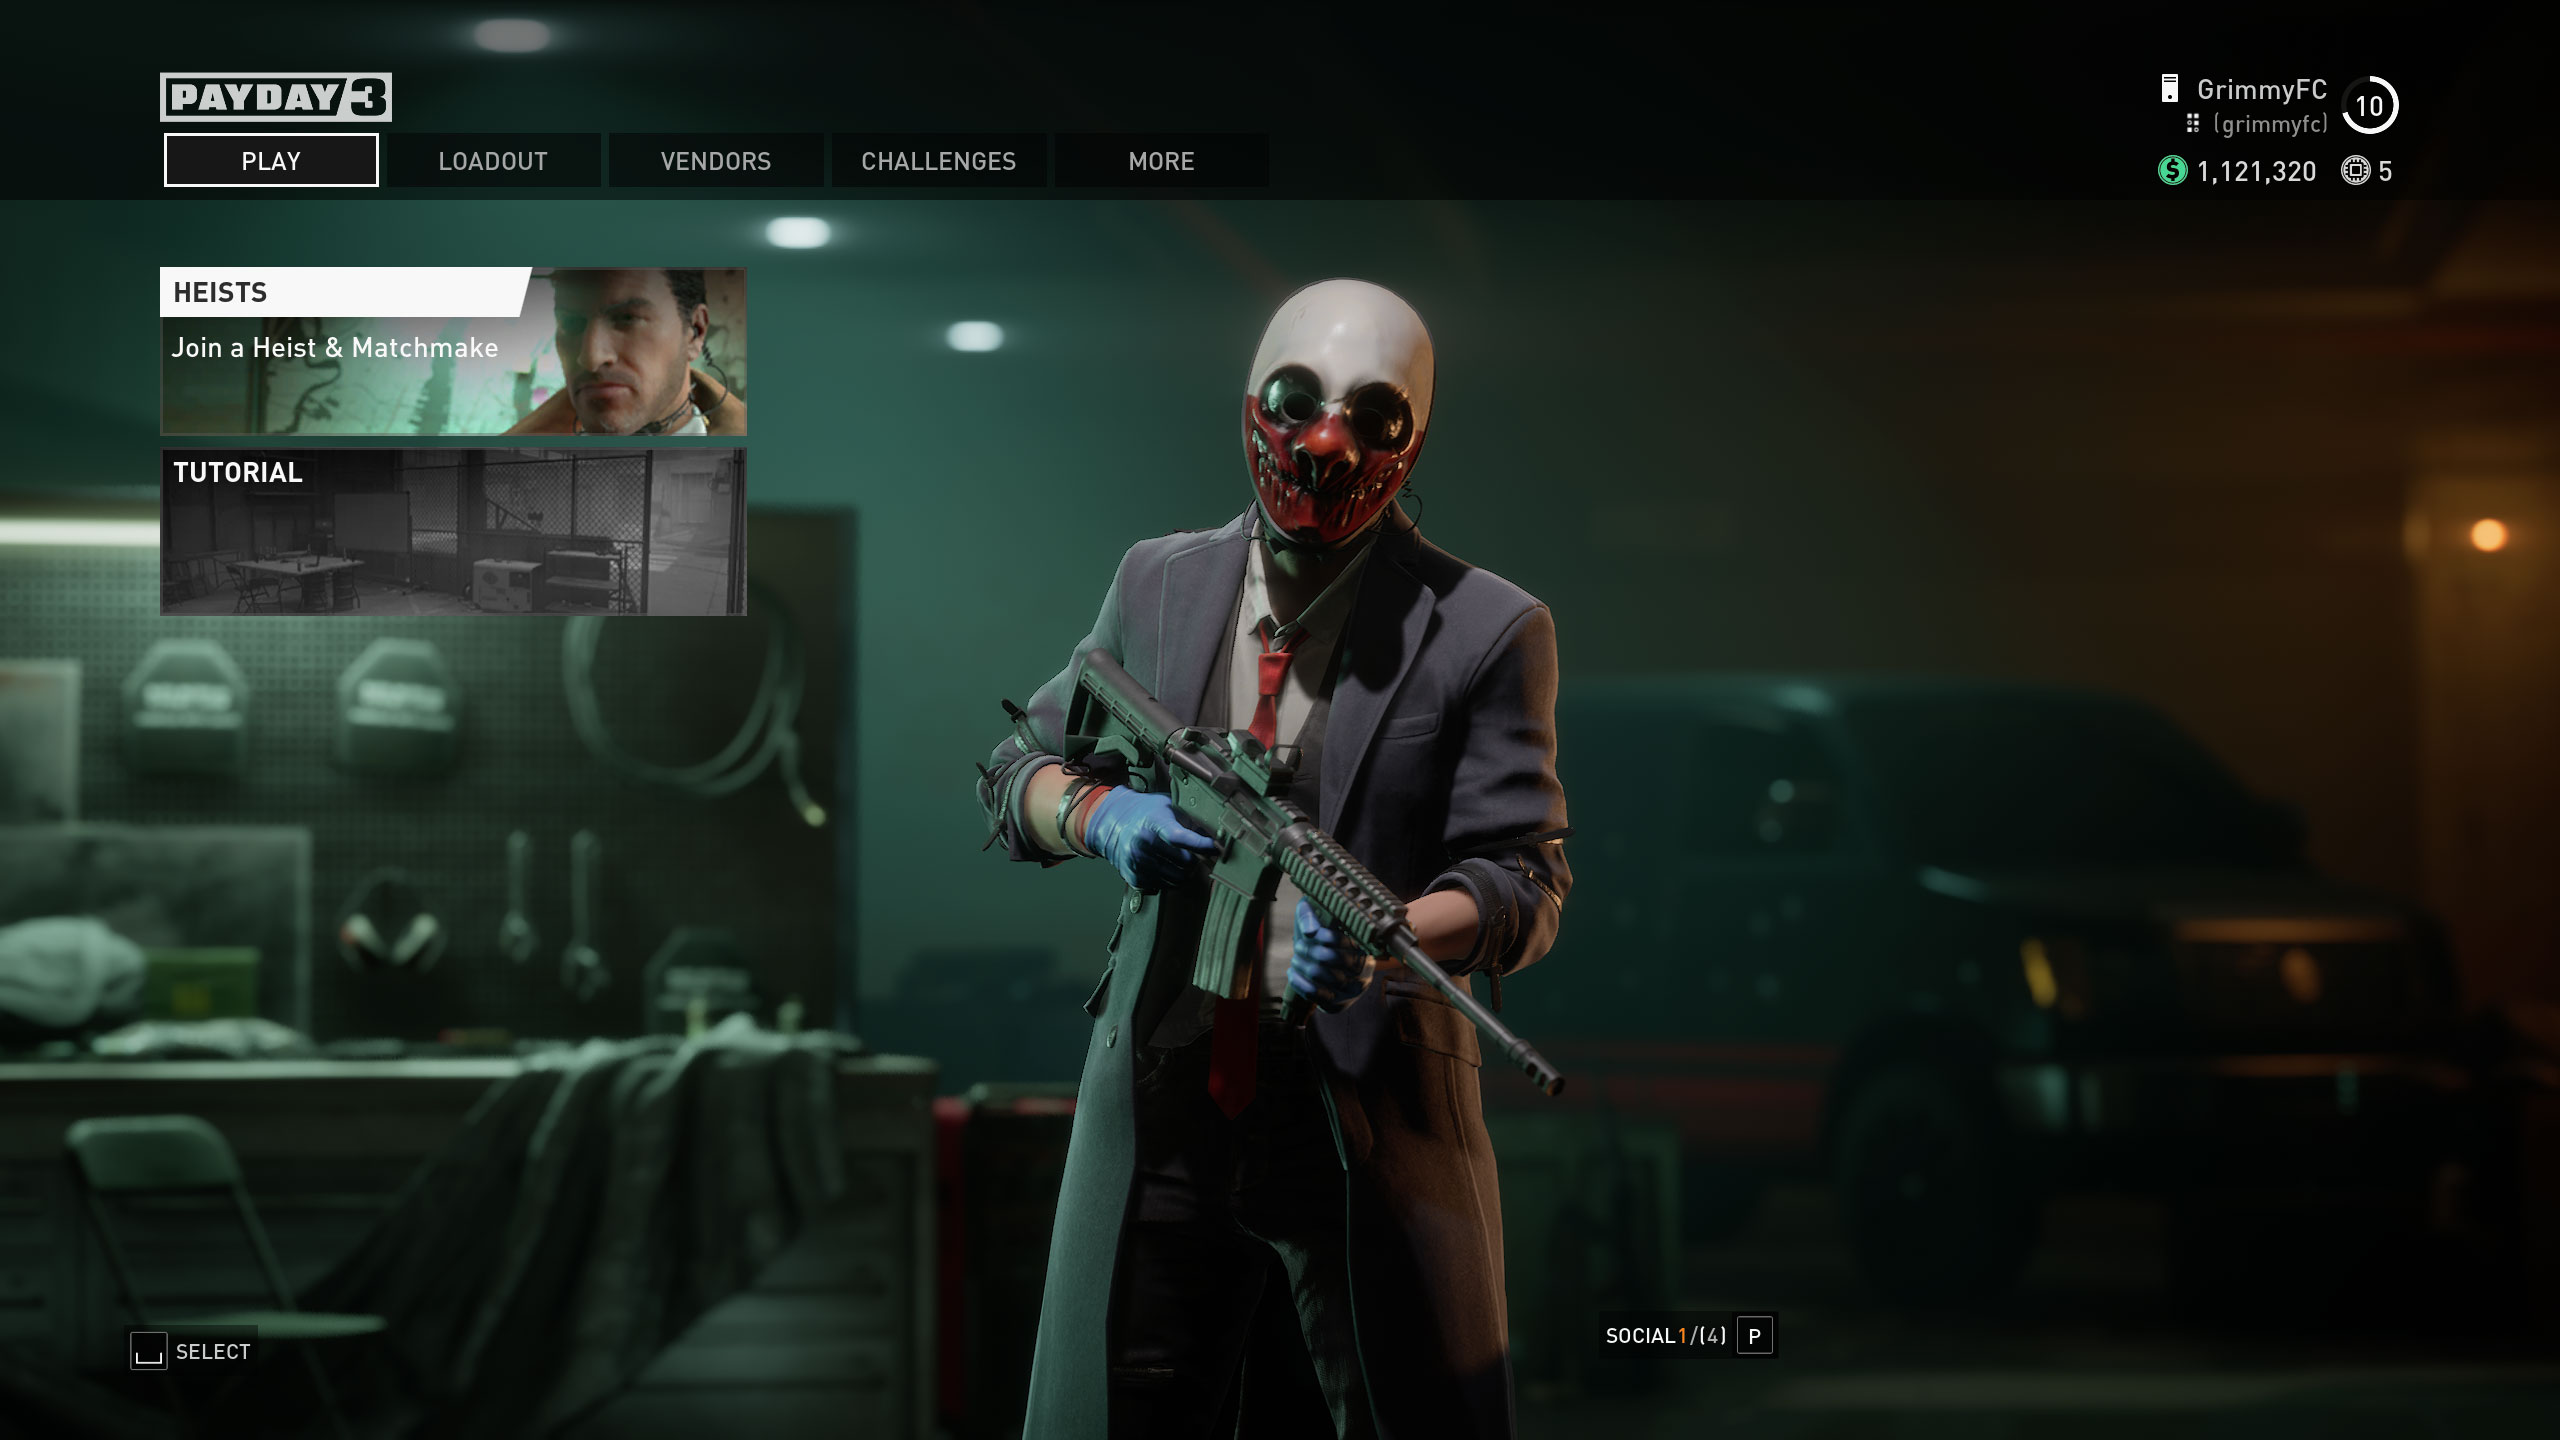 The worst part about Payday 3's rough launch is that the game is actually fun to play